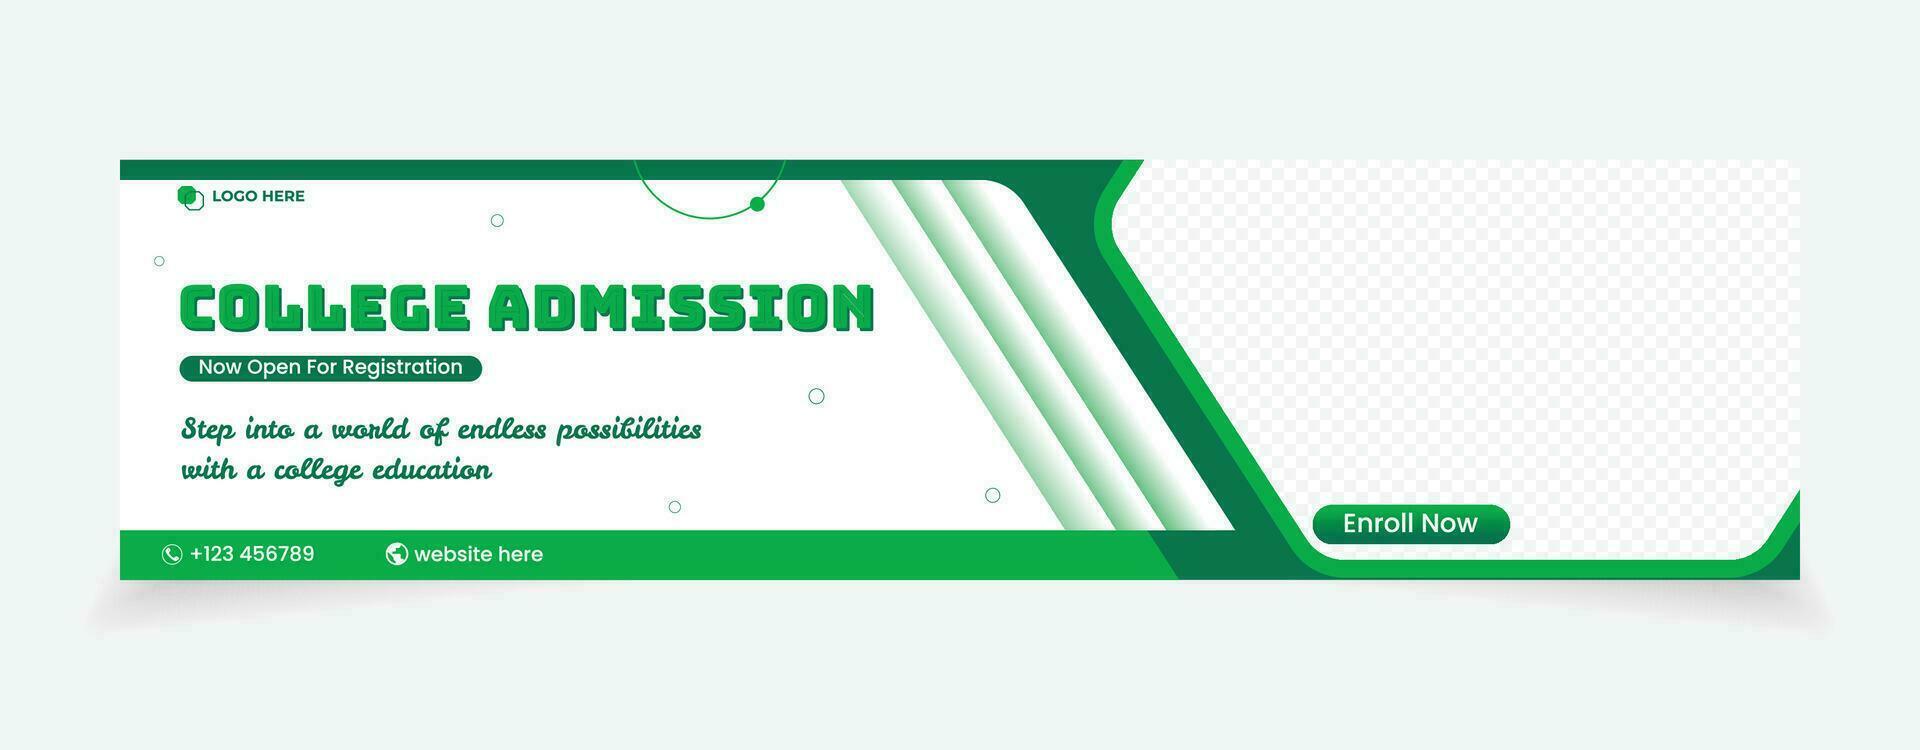 cover social media banner design abstract background admission college school vector